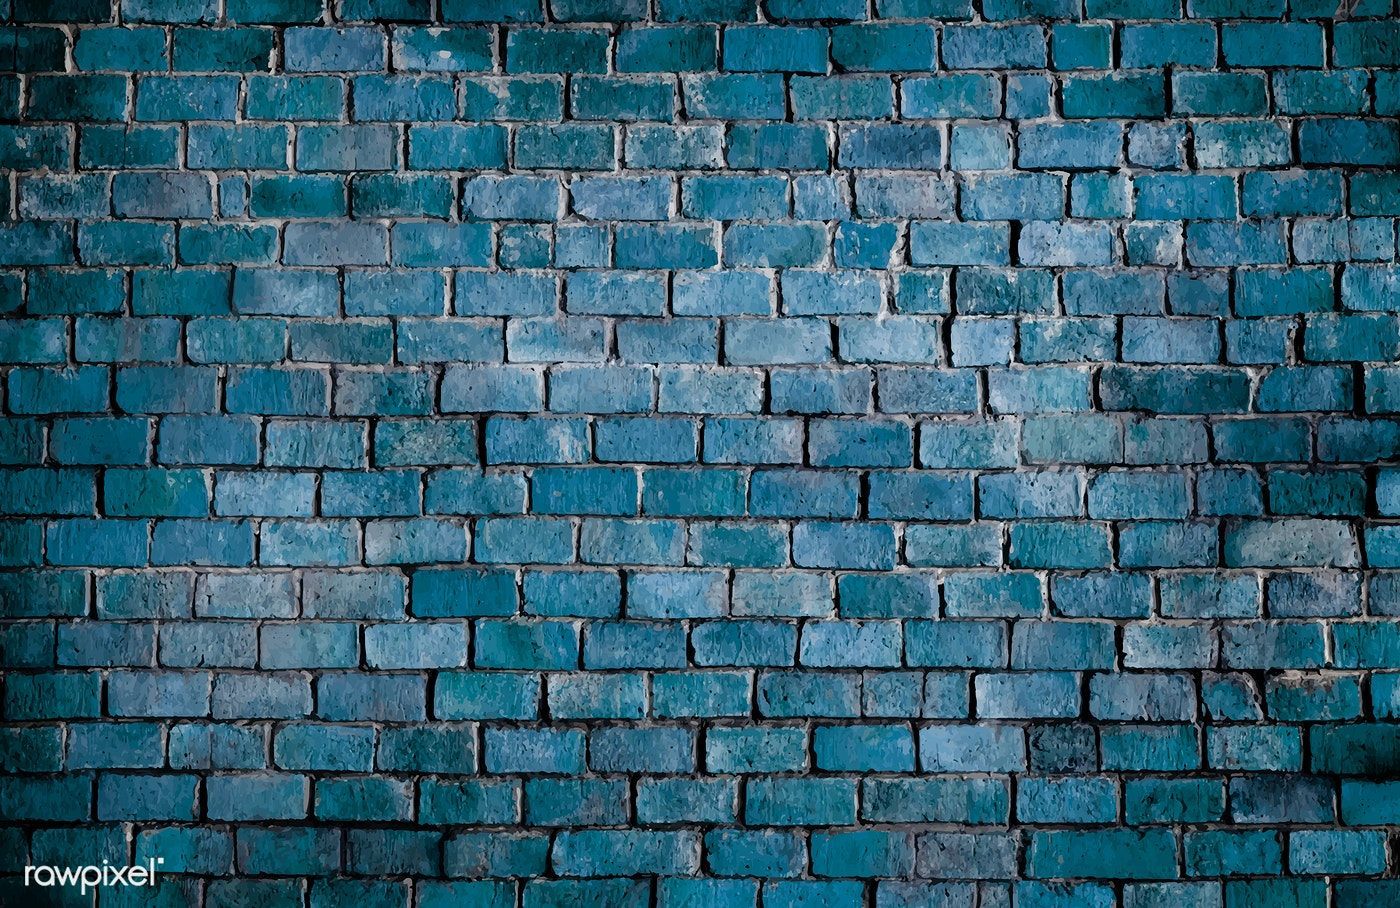 Blue textured brick wall background. free image. Brick wall background, Brick wall, Wall background